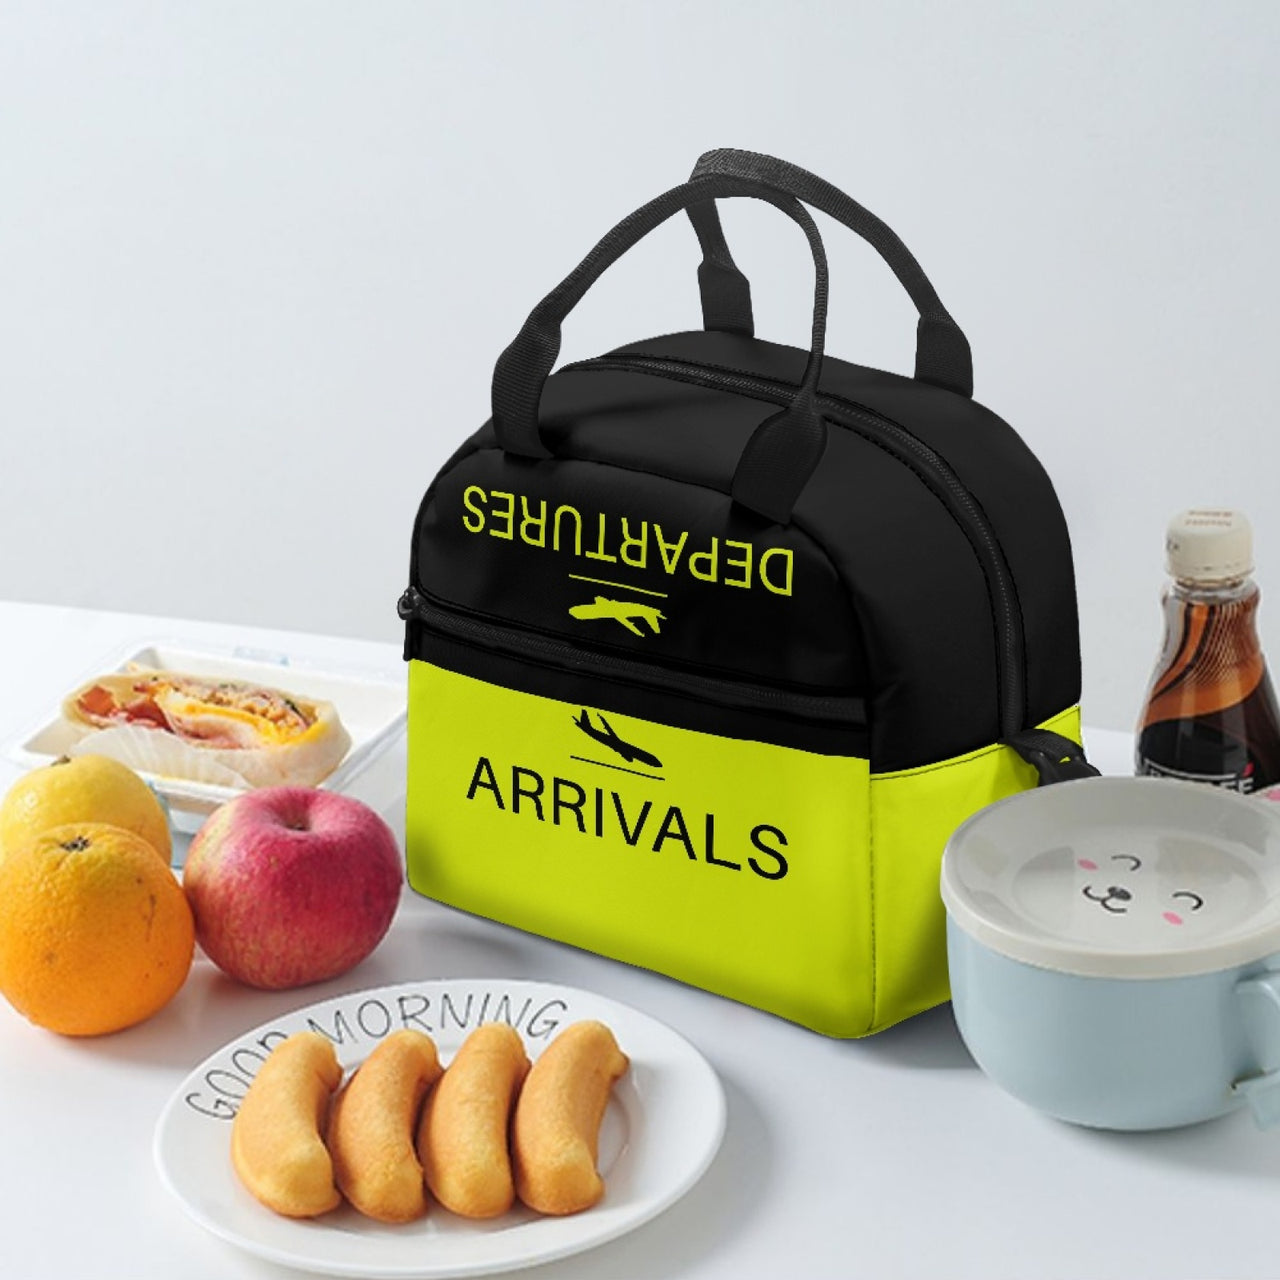 Arrival & Departures (Yellow) Designed Lunch Bags